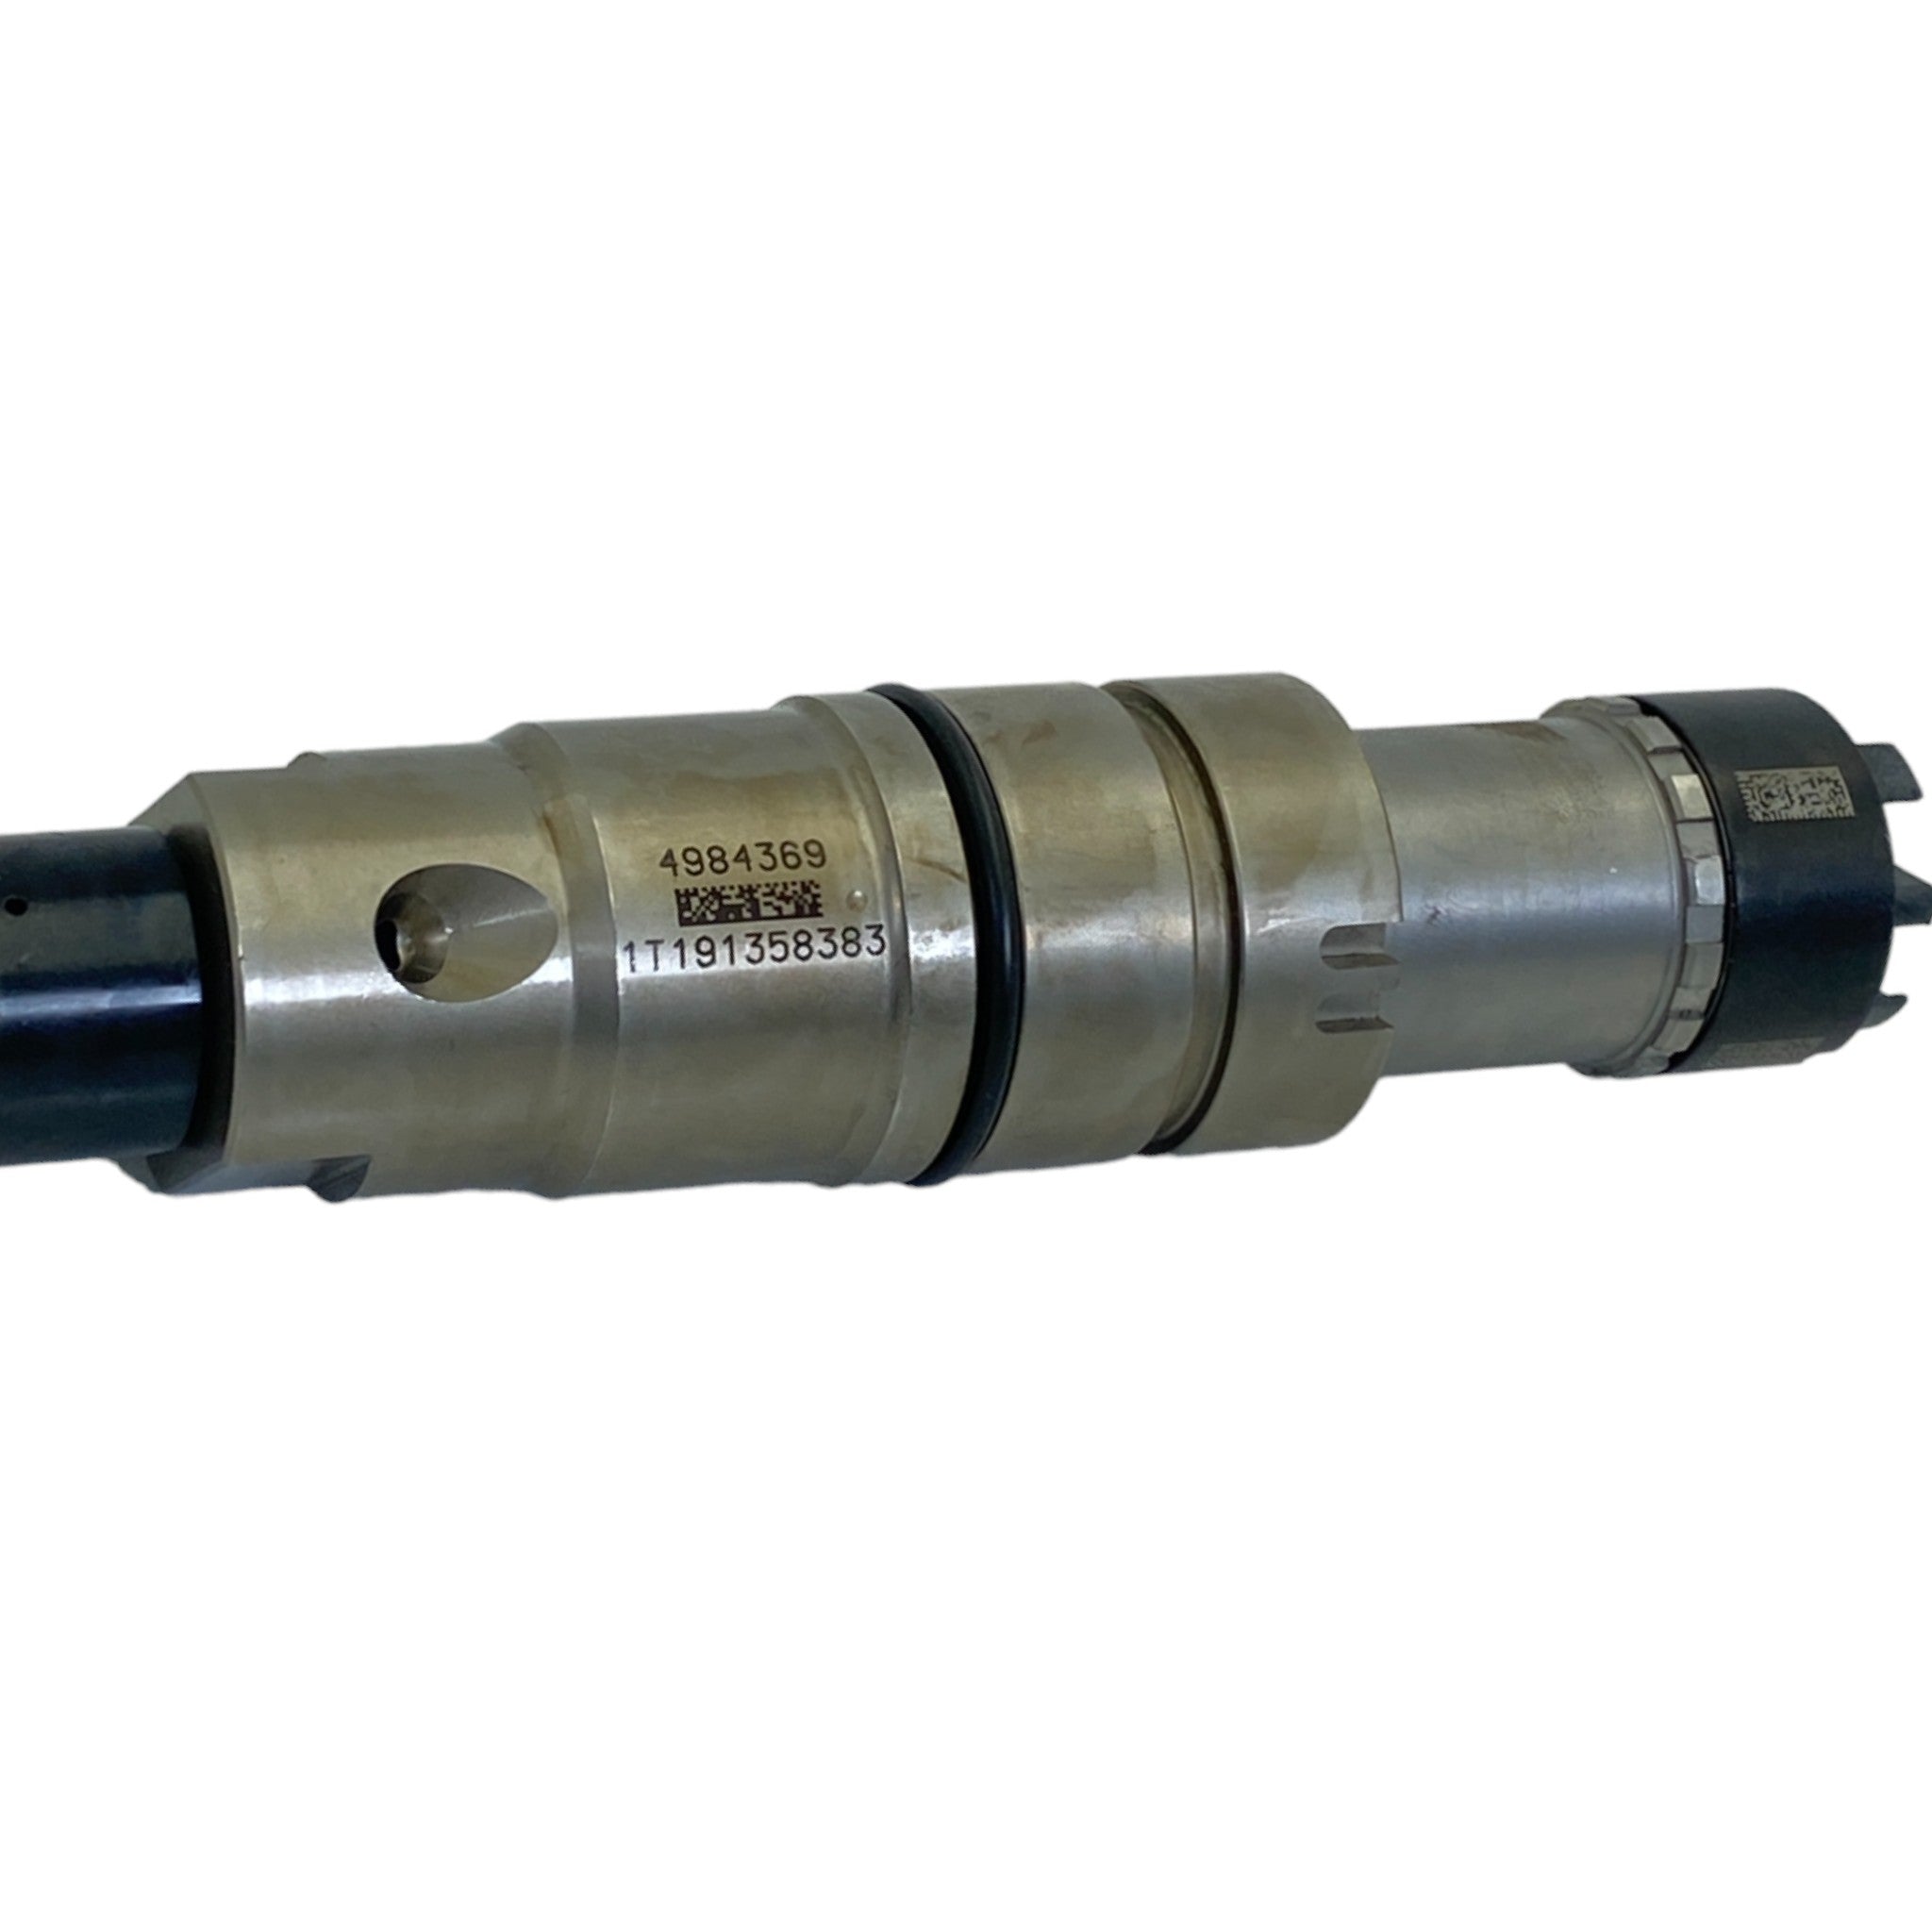 5579419 Oem Cummins Fuel Injector For Xpi Fuel Systems On Epa13 15L Isx/Qsx Engines